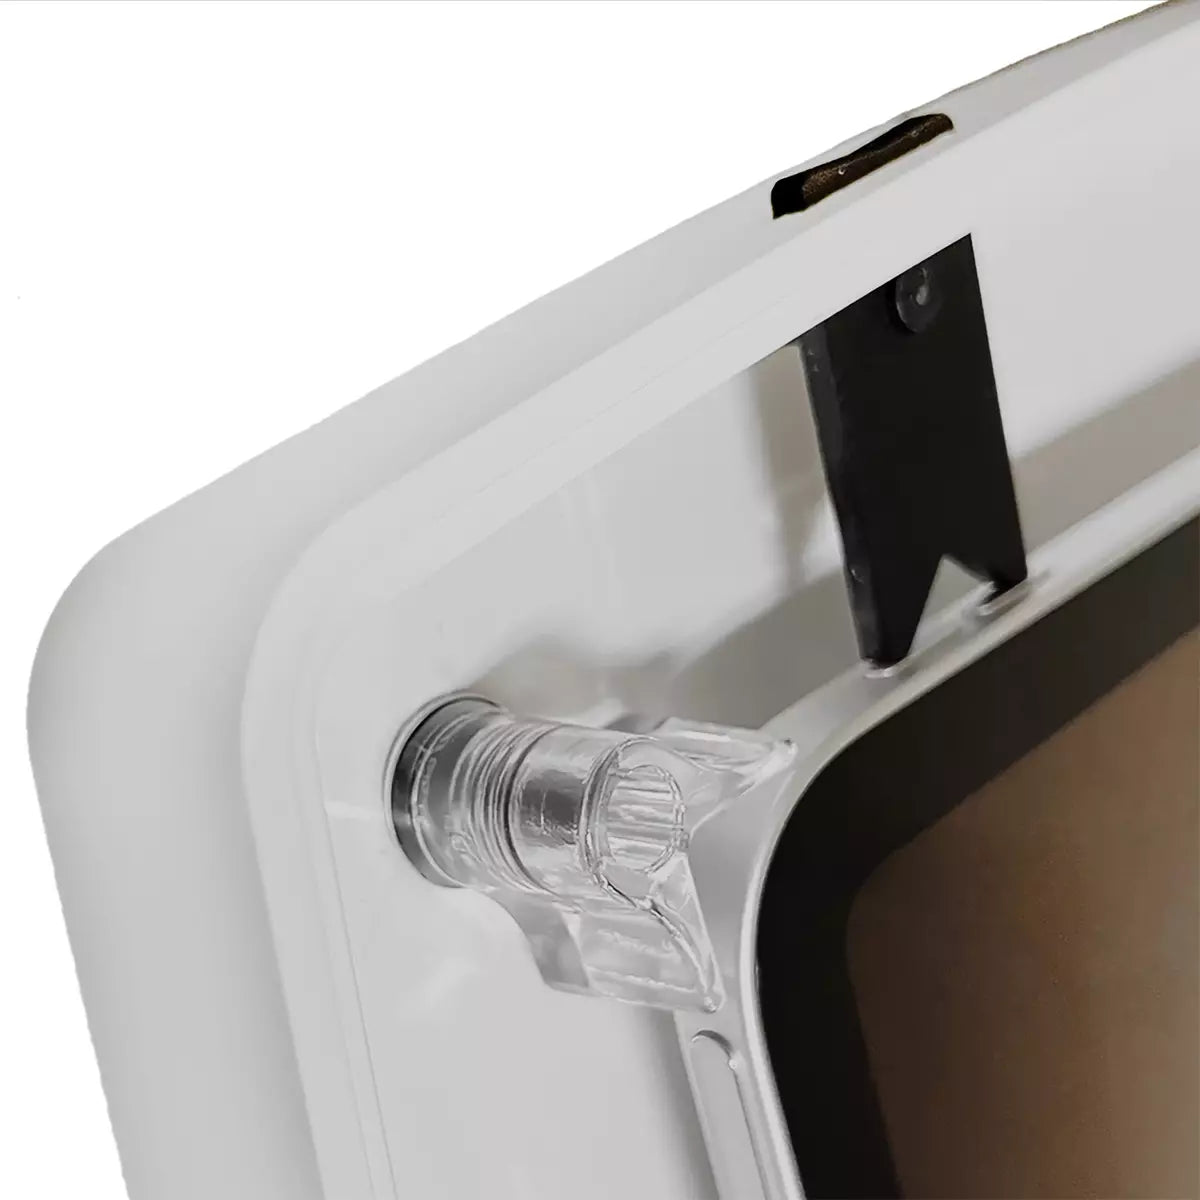 Hardware of the Armodilo volume toggle for Tablet and iPad enclosures